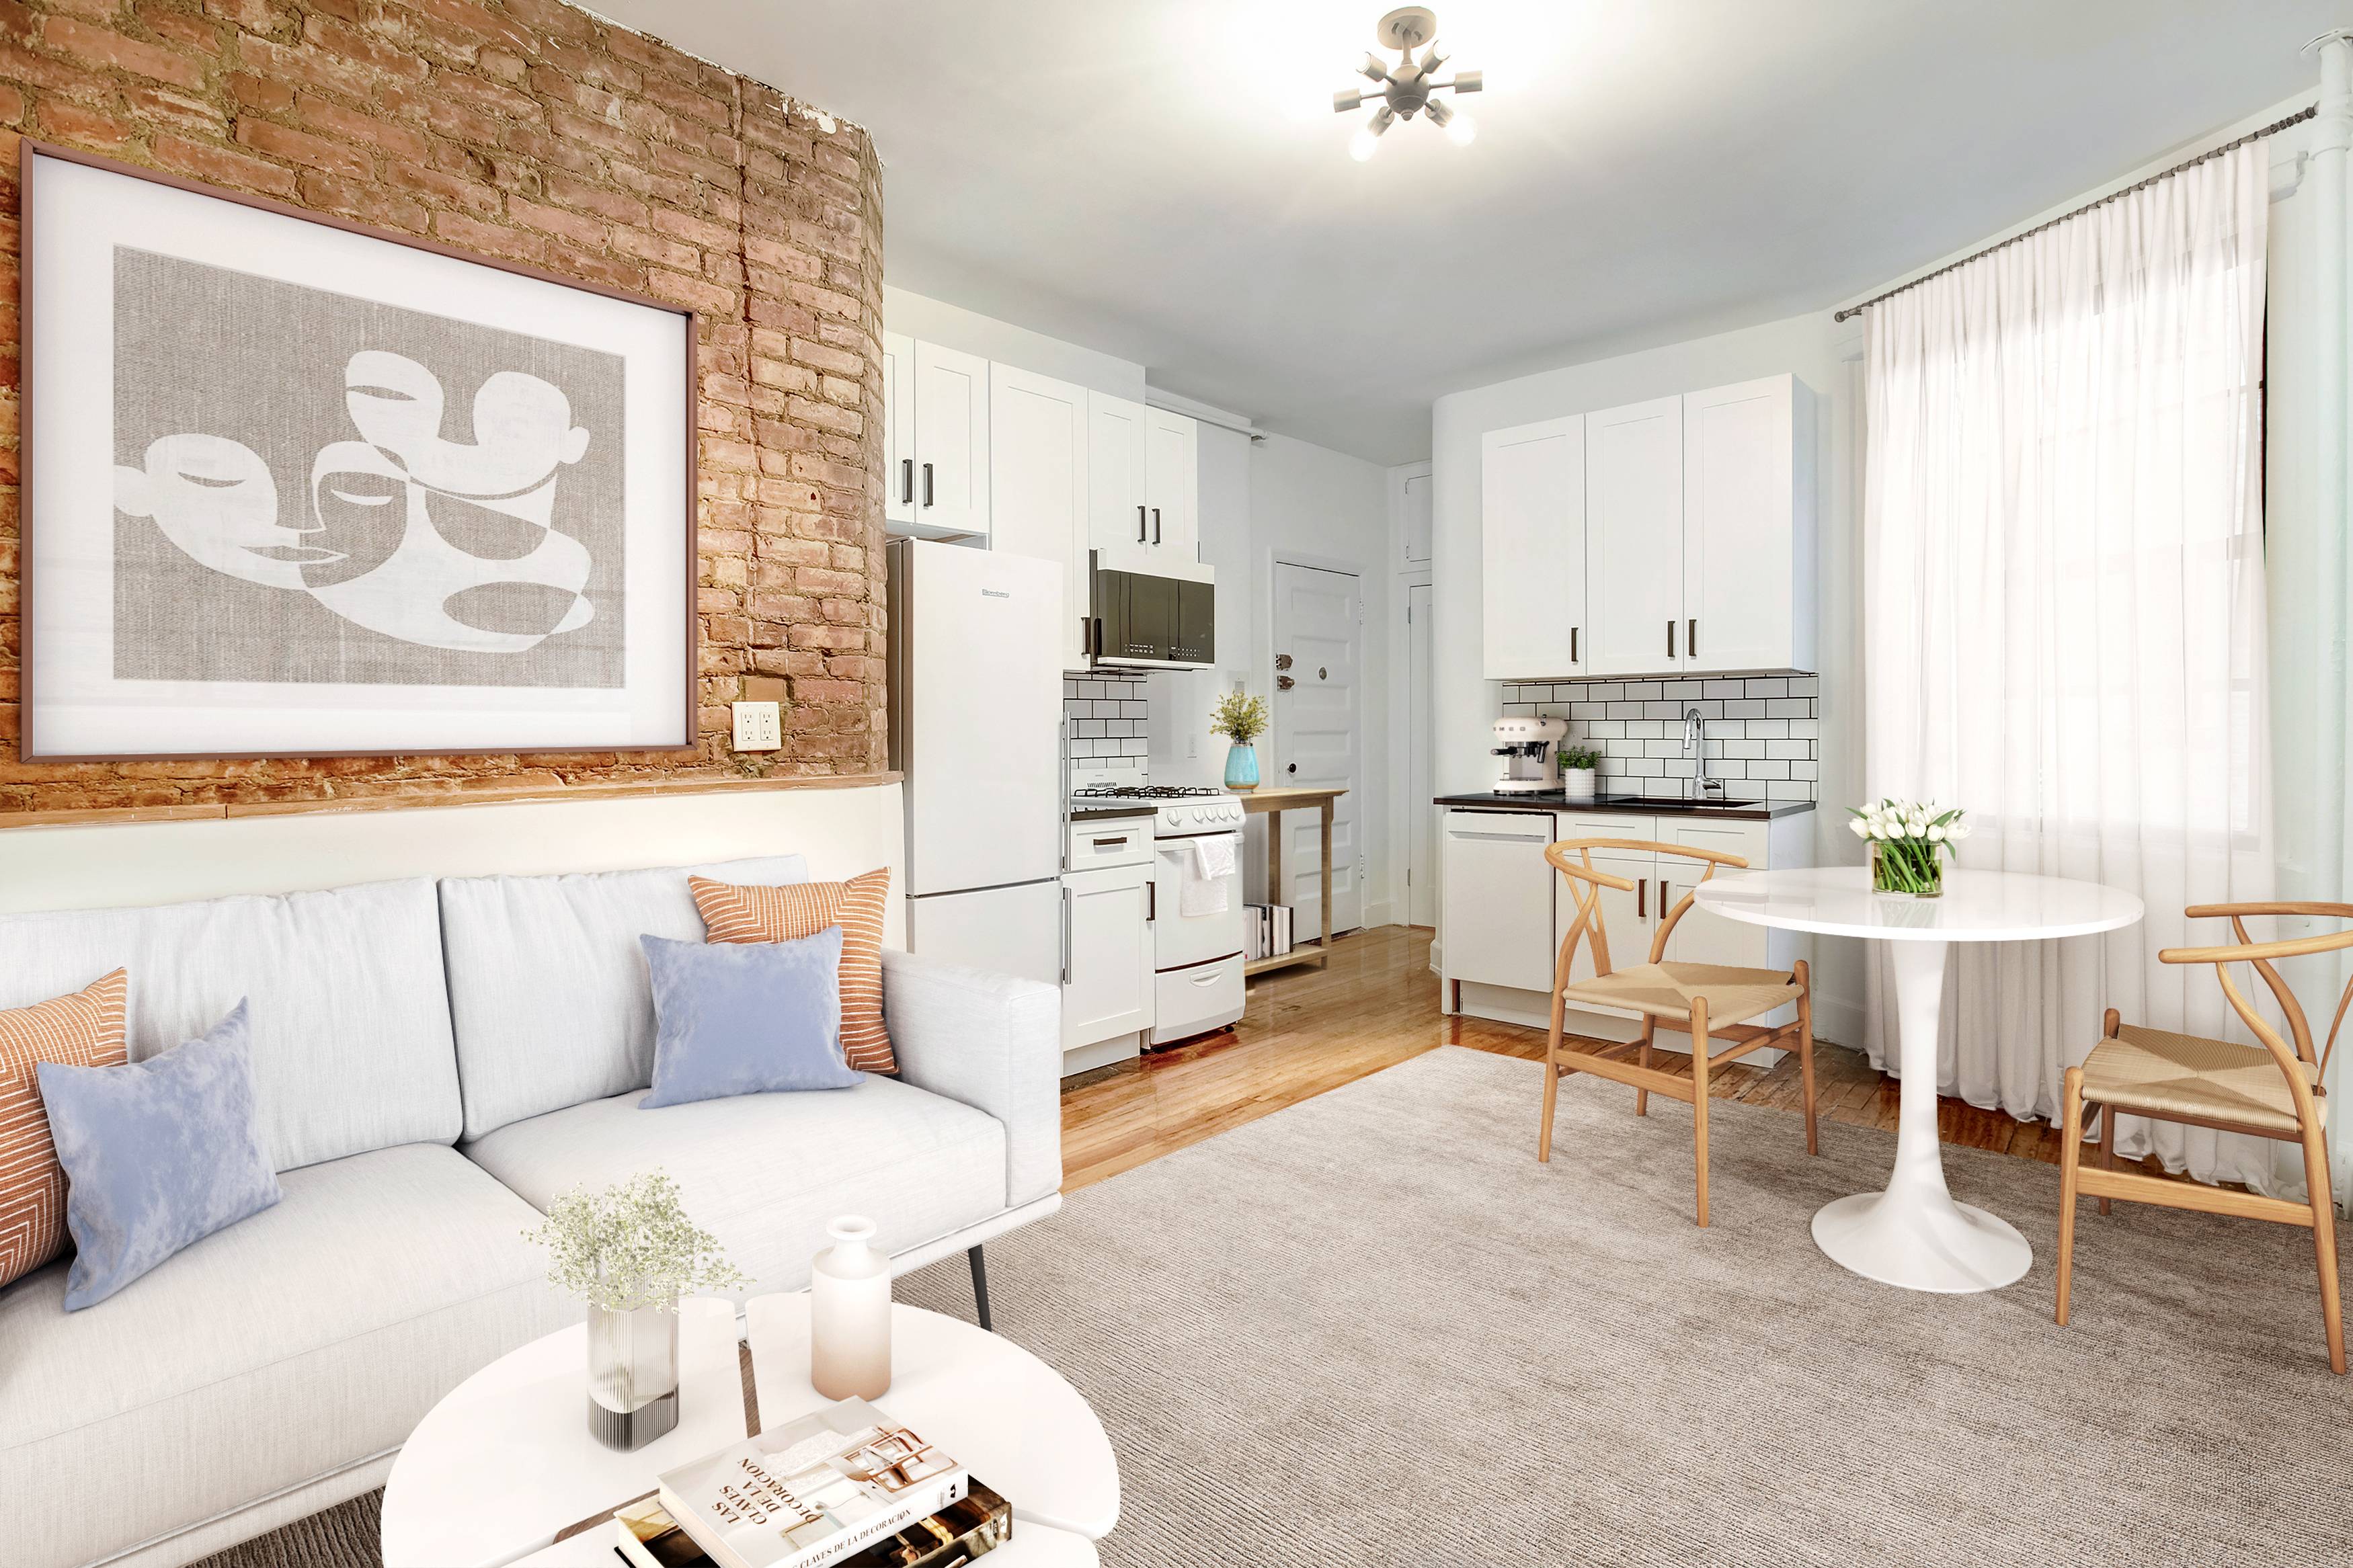 SoHo Investor Friendly Co Op Pre War 3BD 1BA Open Floor Plan, Spacious Bedrooms, Renovated Kitchen with Dishwasher and Touch Microwave, Exposed Brick, and Sprawling Hardwood Floors in a Pet ...